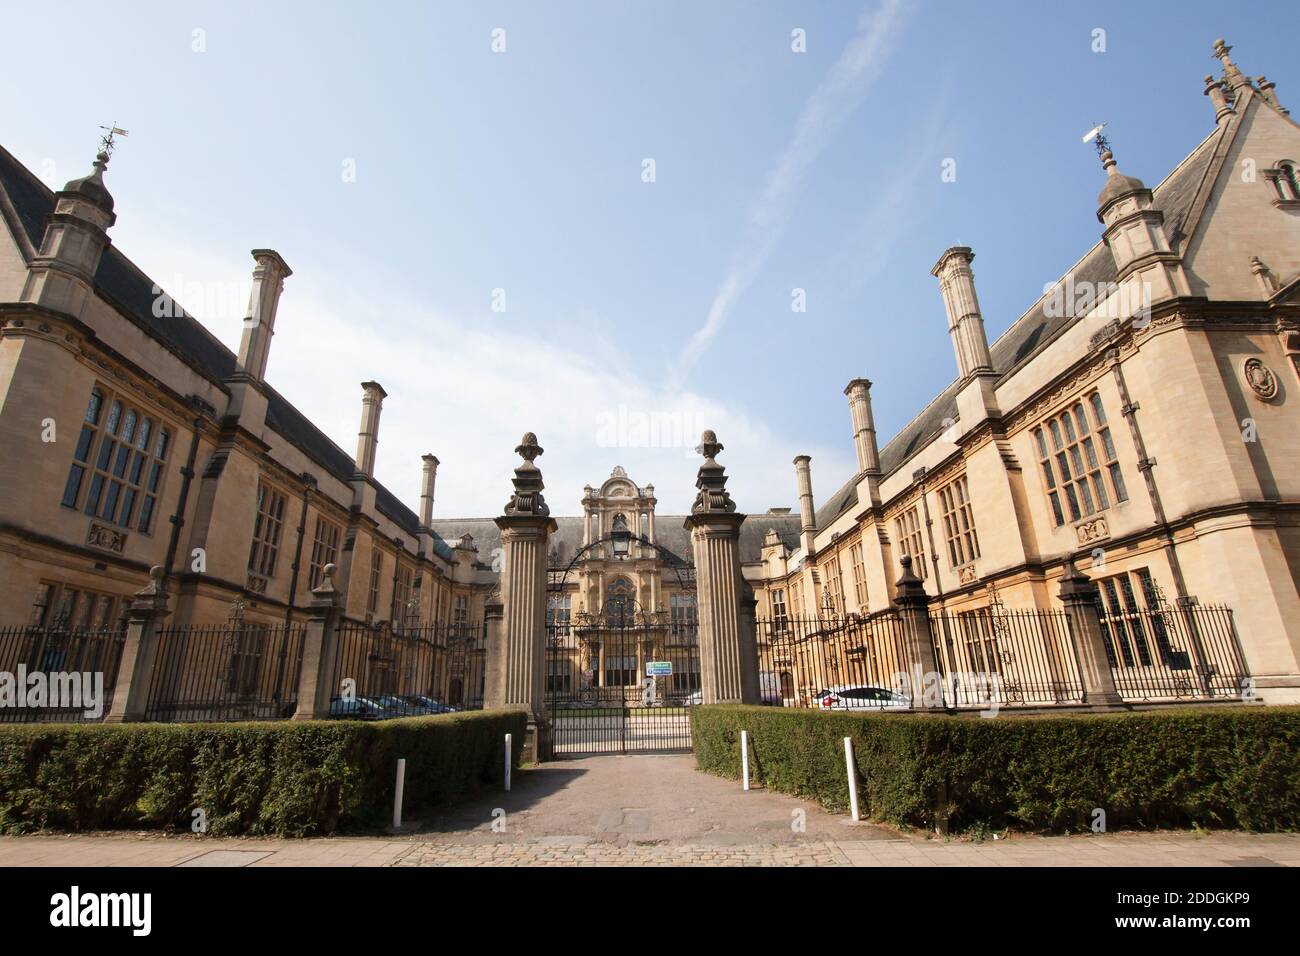 Merton College in Oxford, part of Oxford University in the UK, taken on the 15th of September 2020 Stock Photo